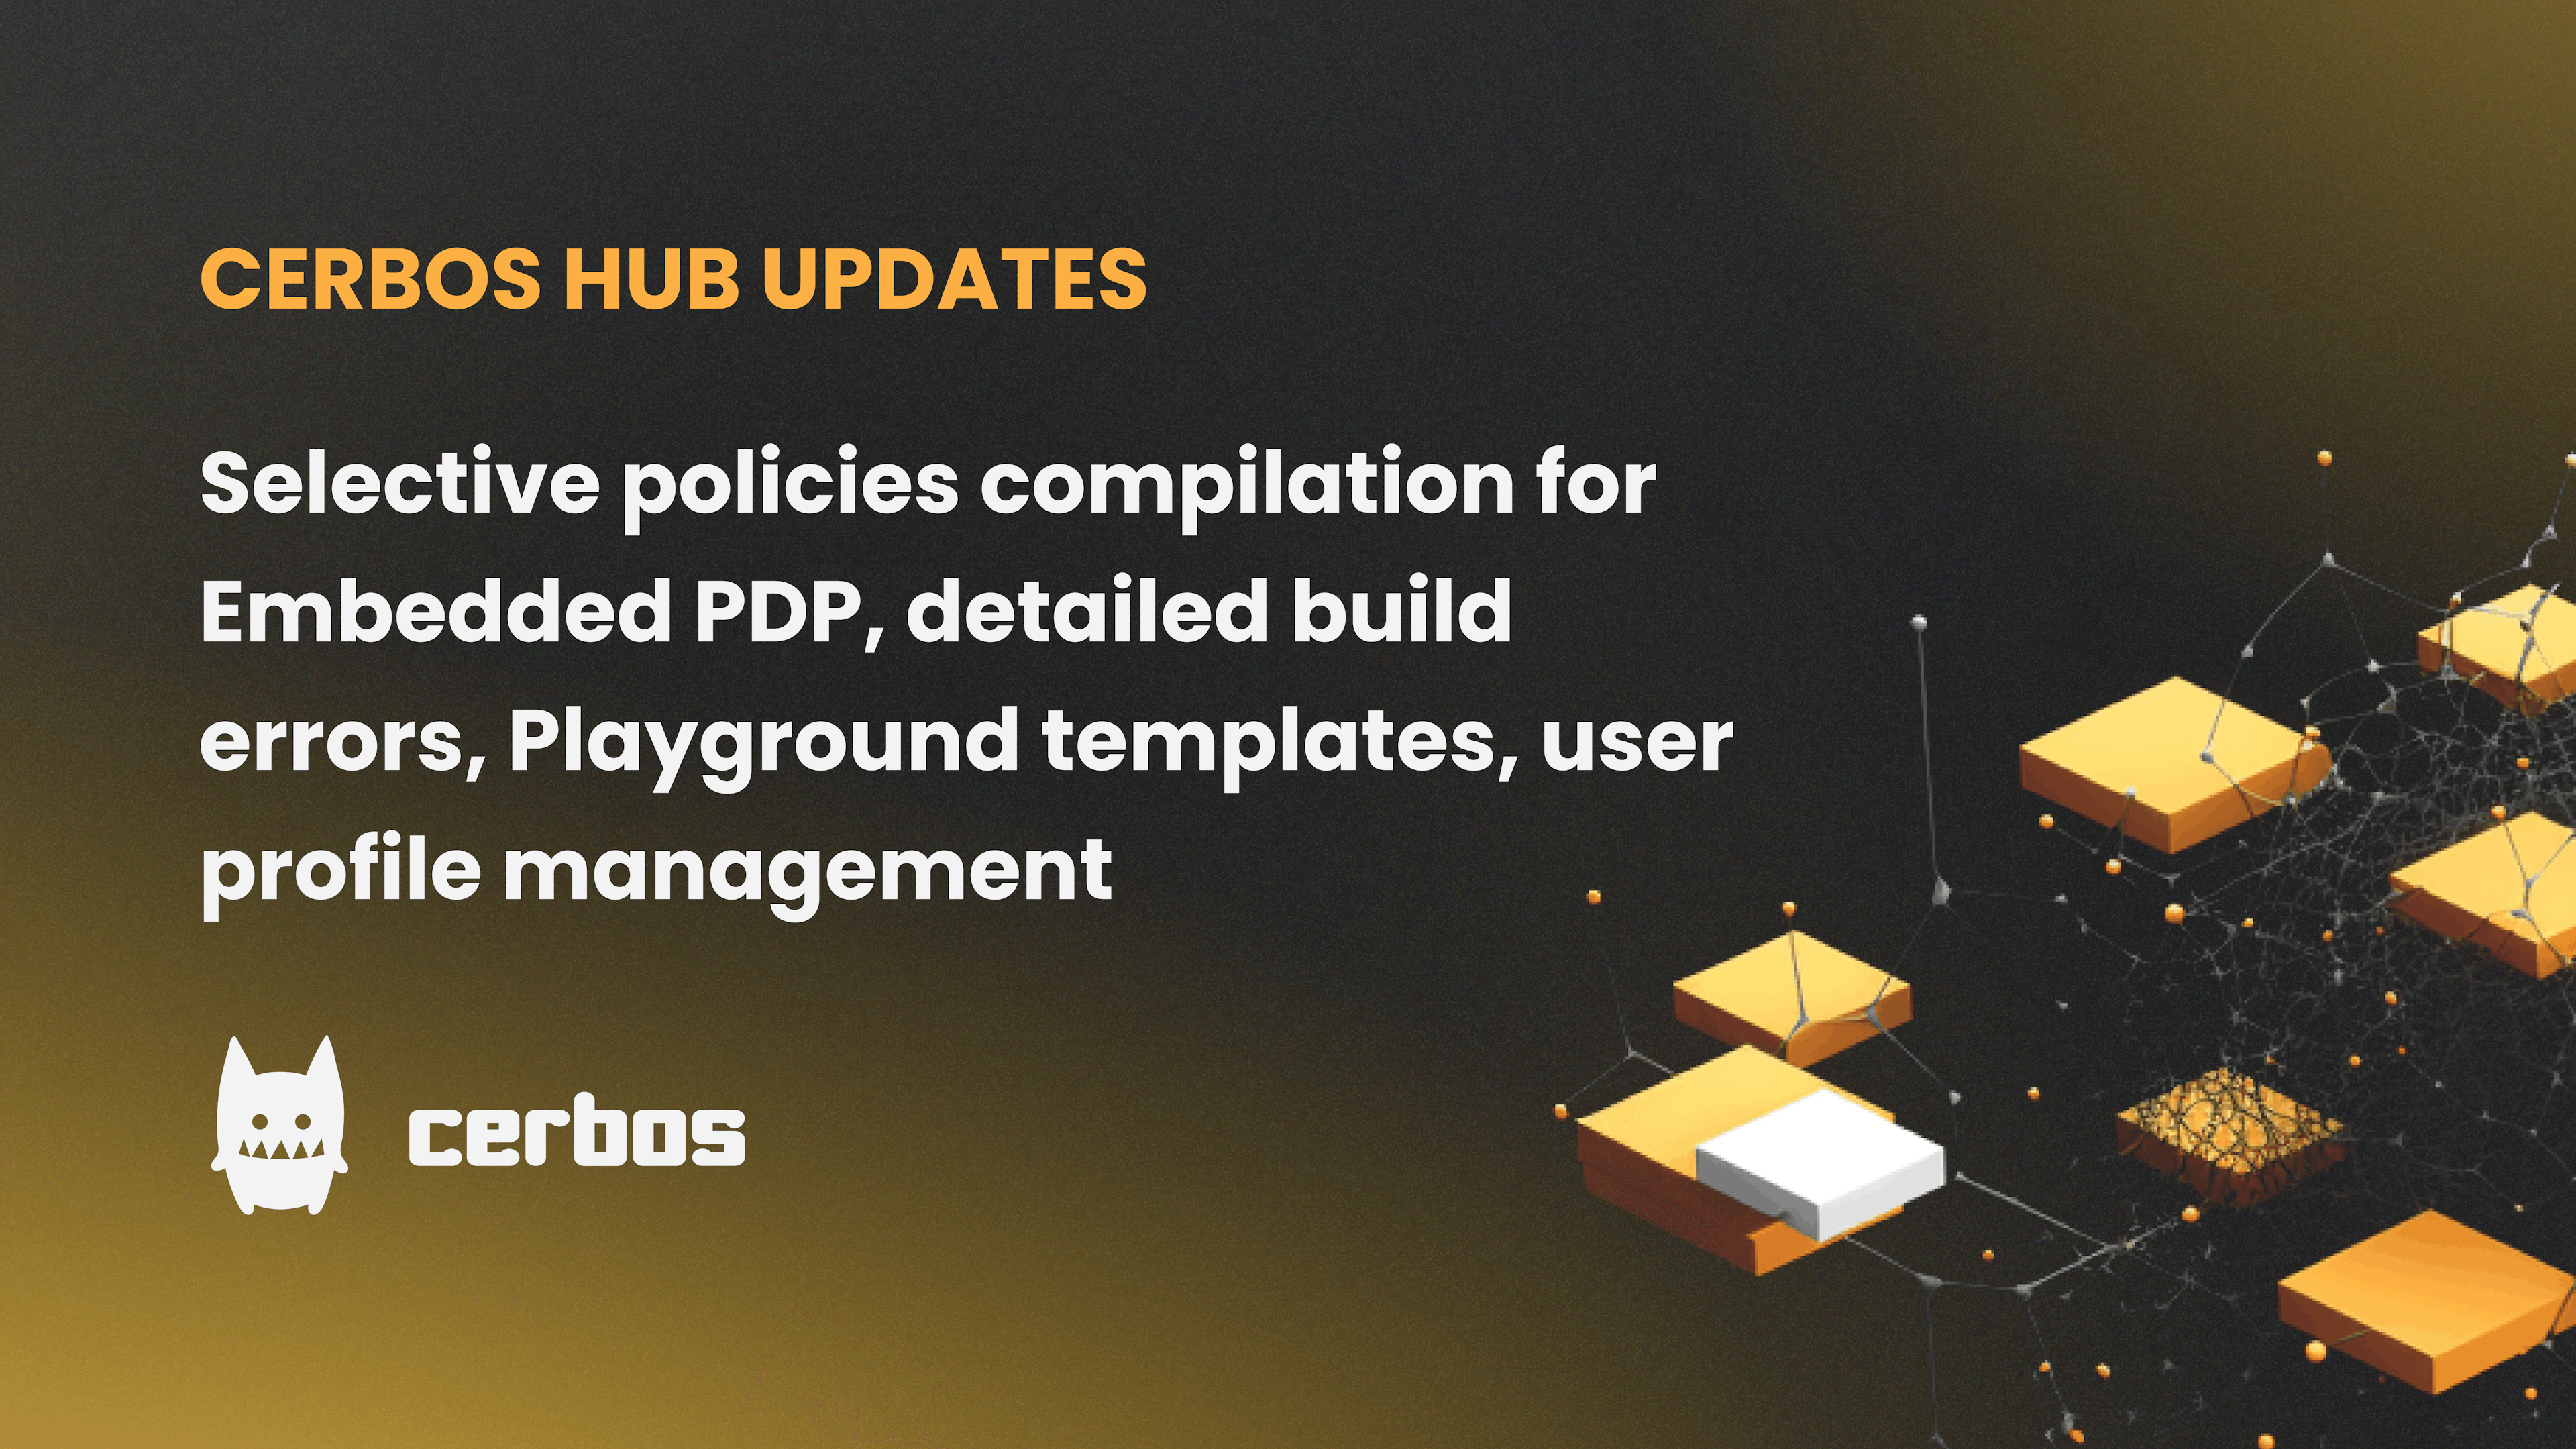 Cerbos Hub - July Product Updates